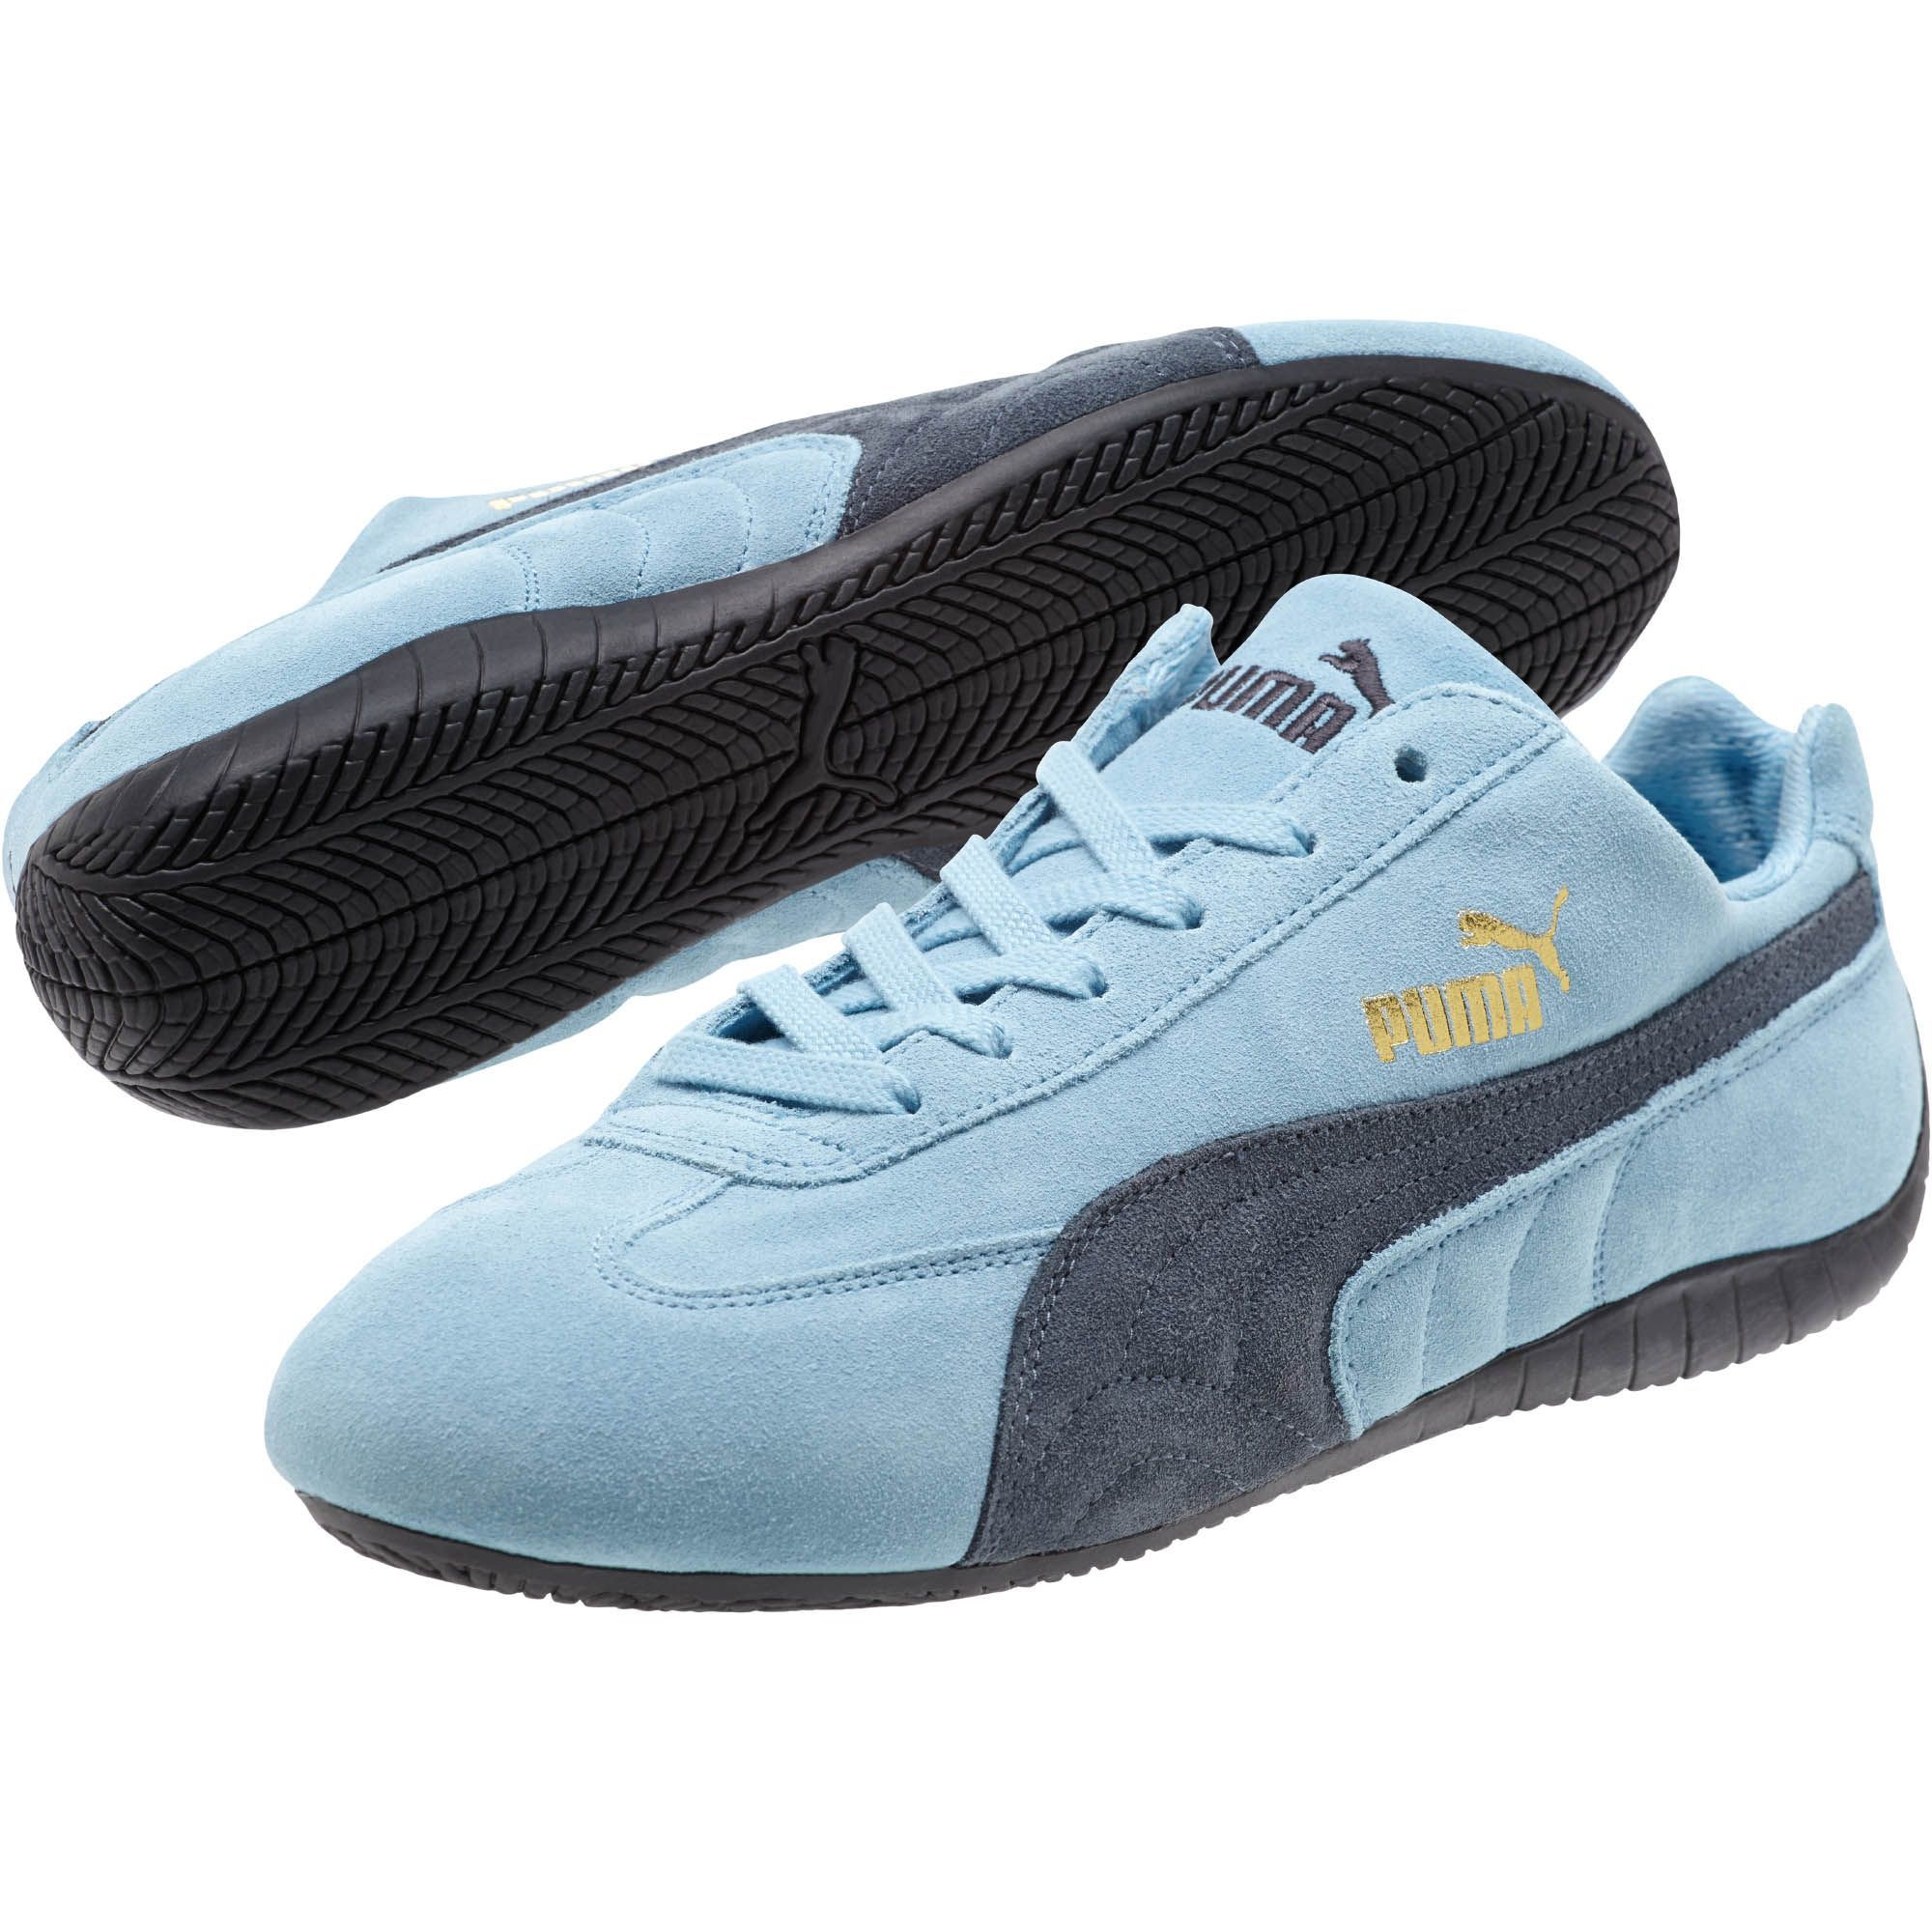 PUMA Suede Speed Cat Shoes in Gray for Men - Lyst